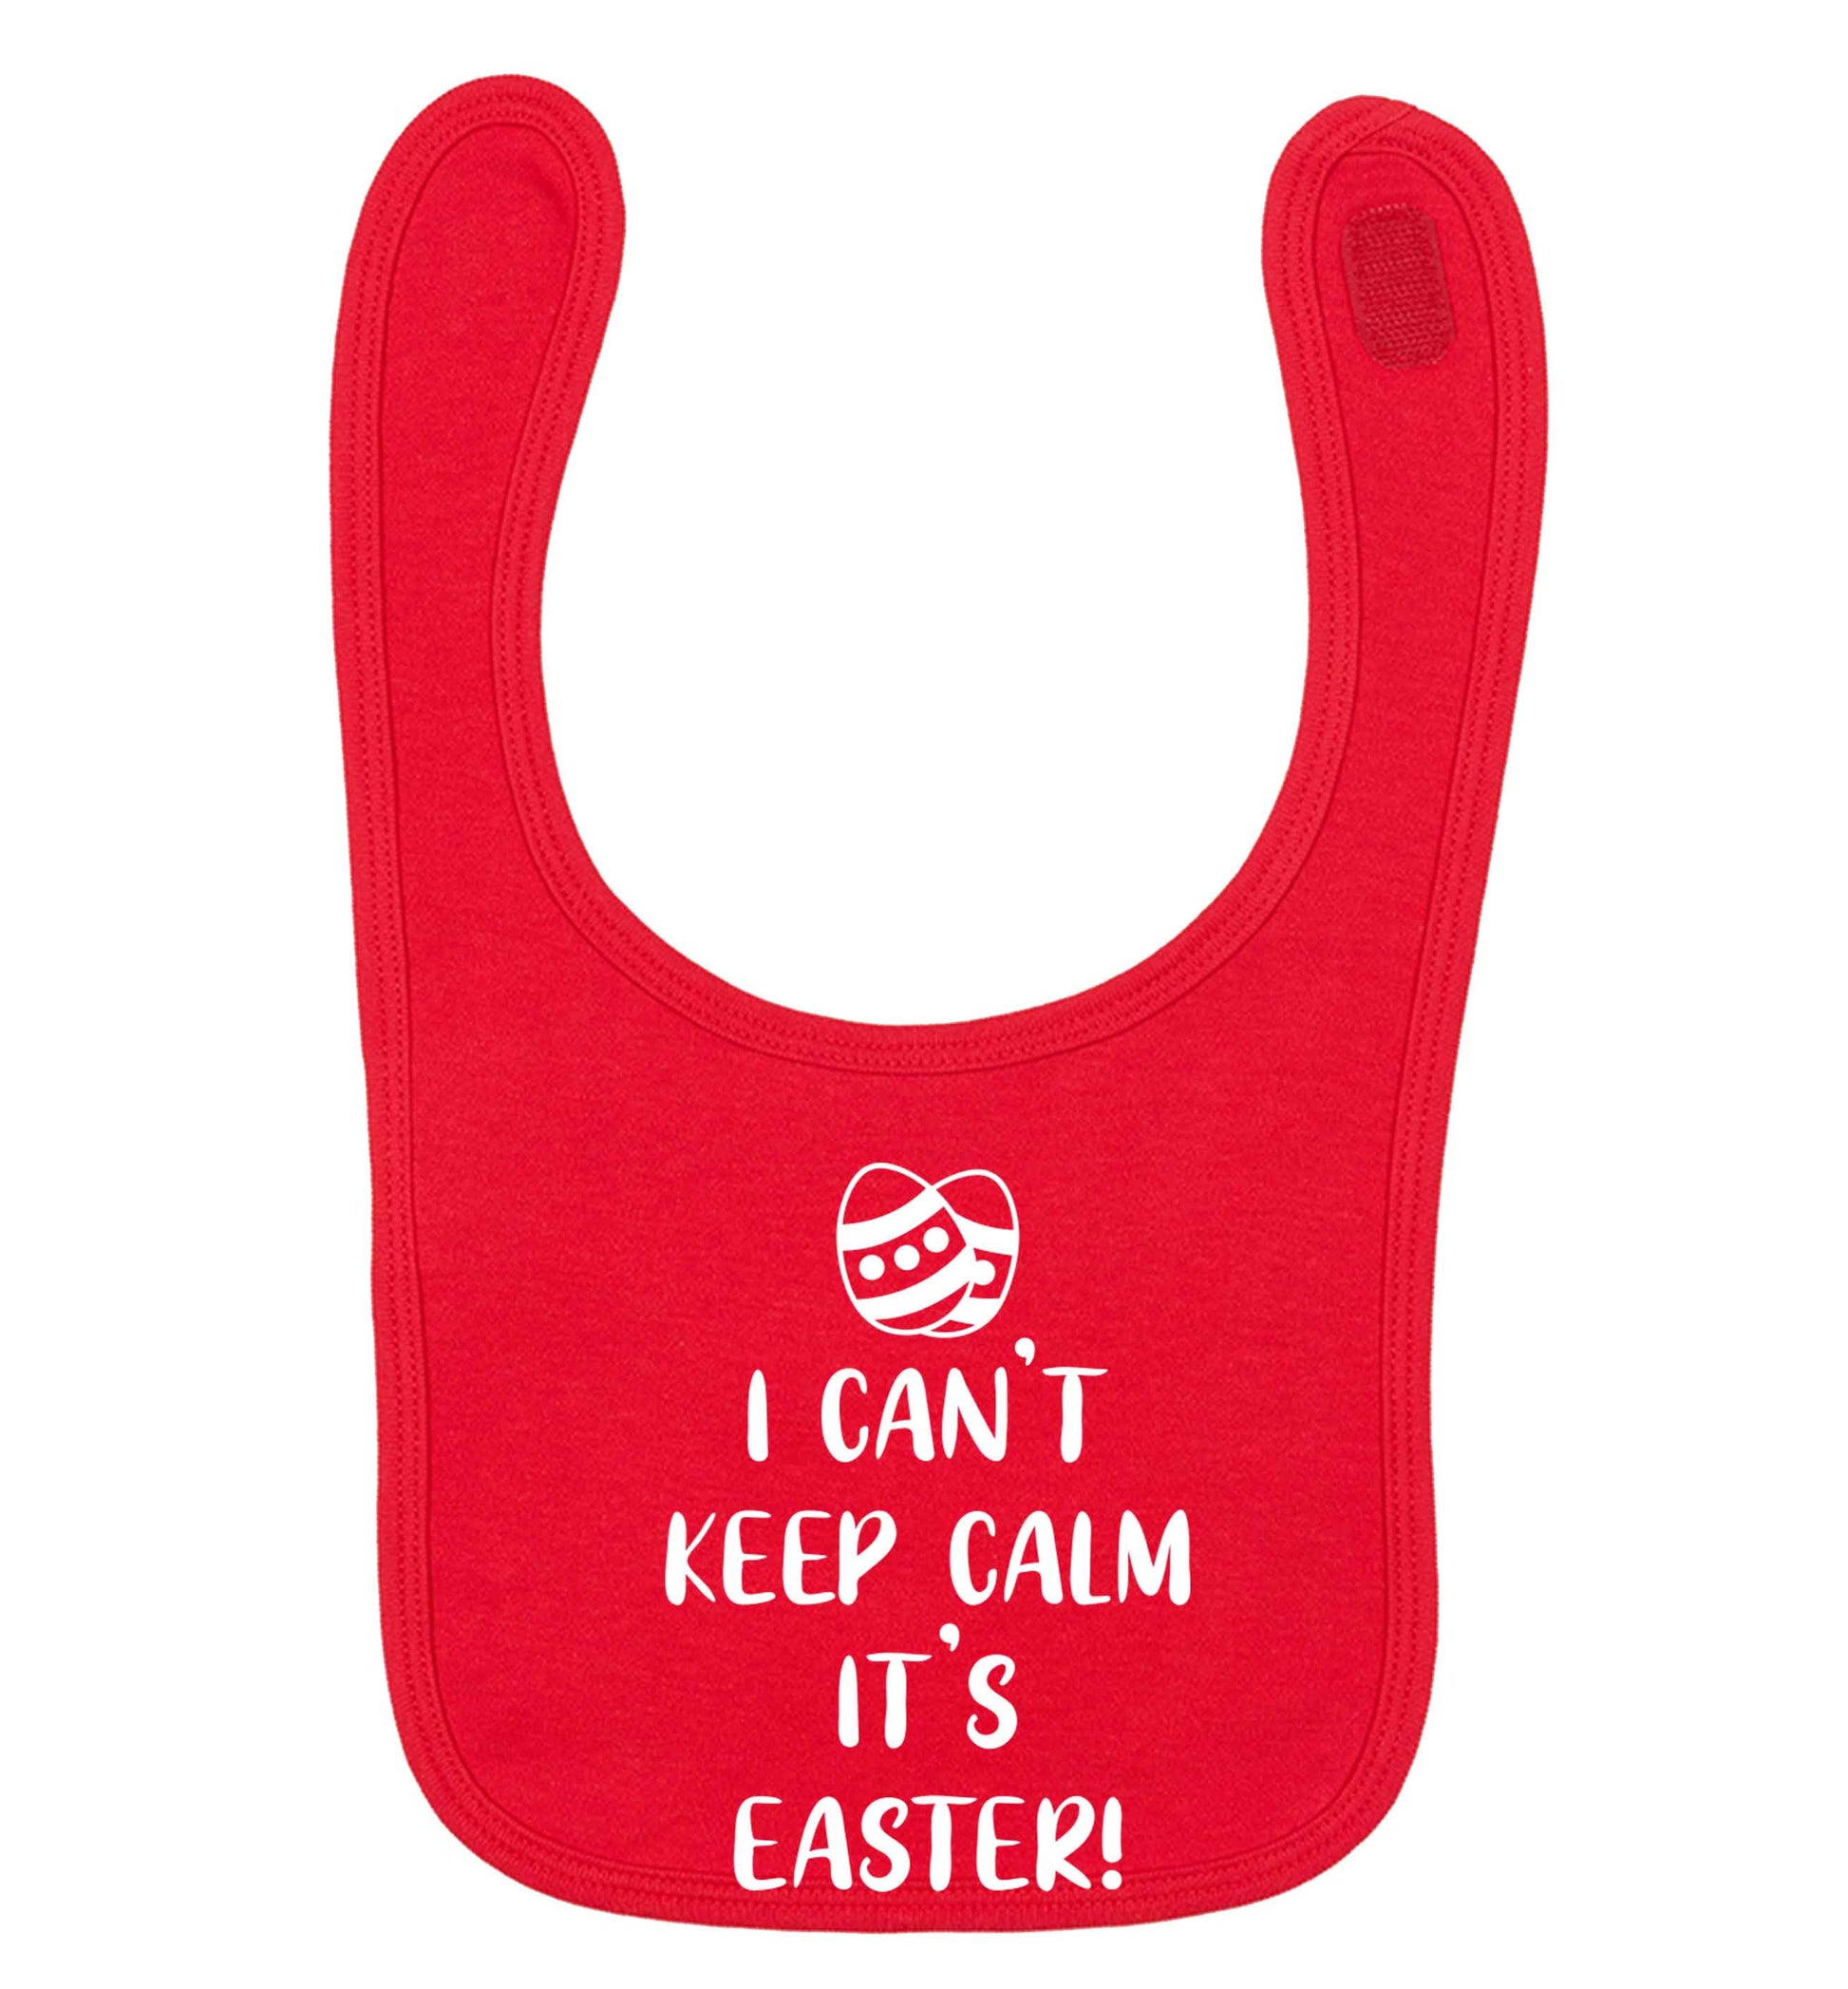 I can't keep calm it's Easter red baby bib